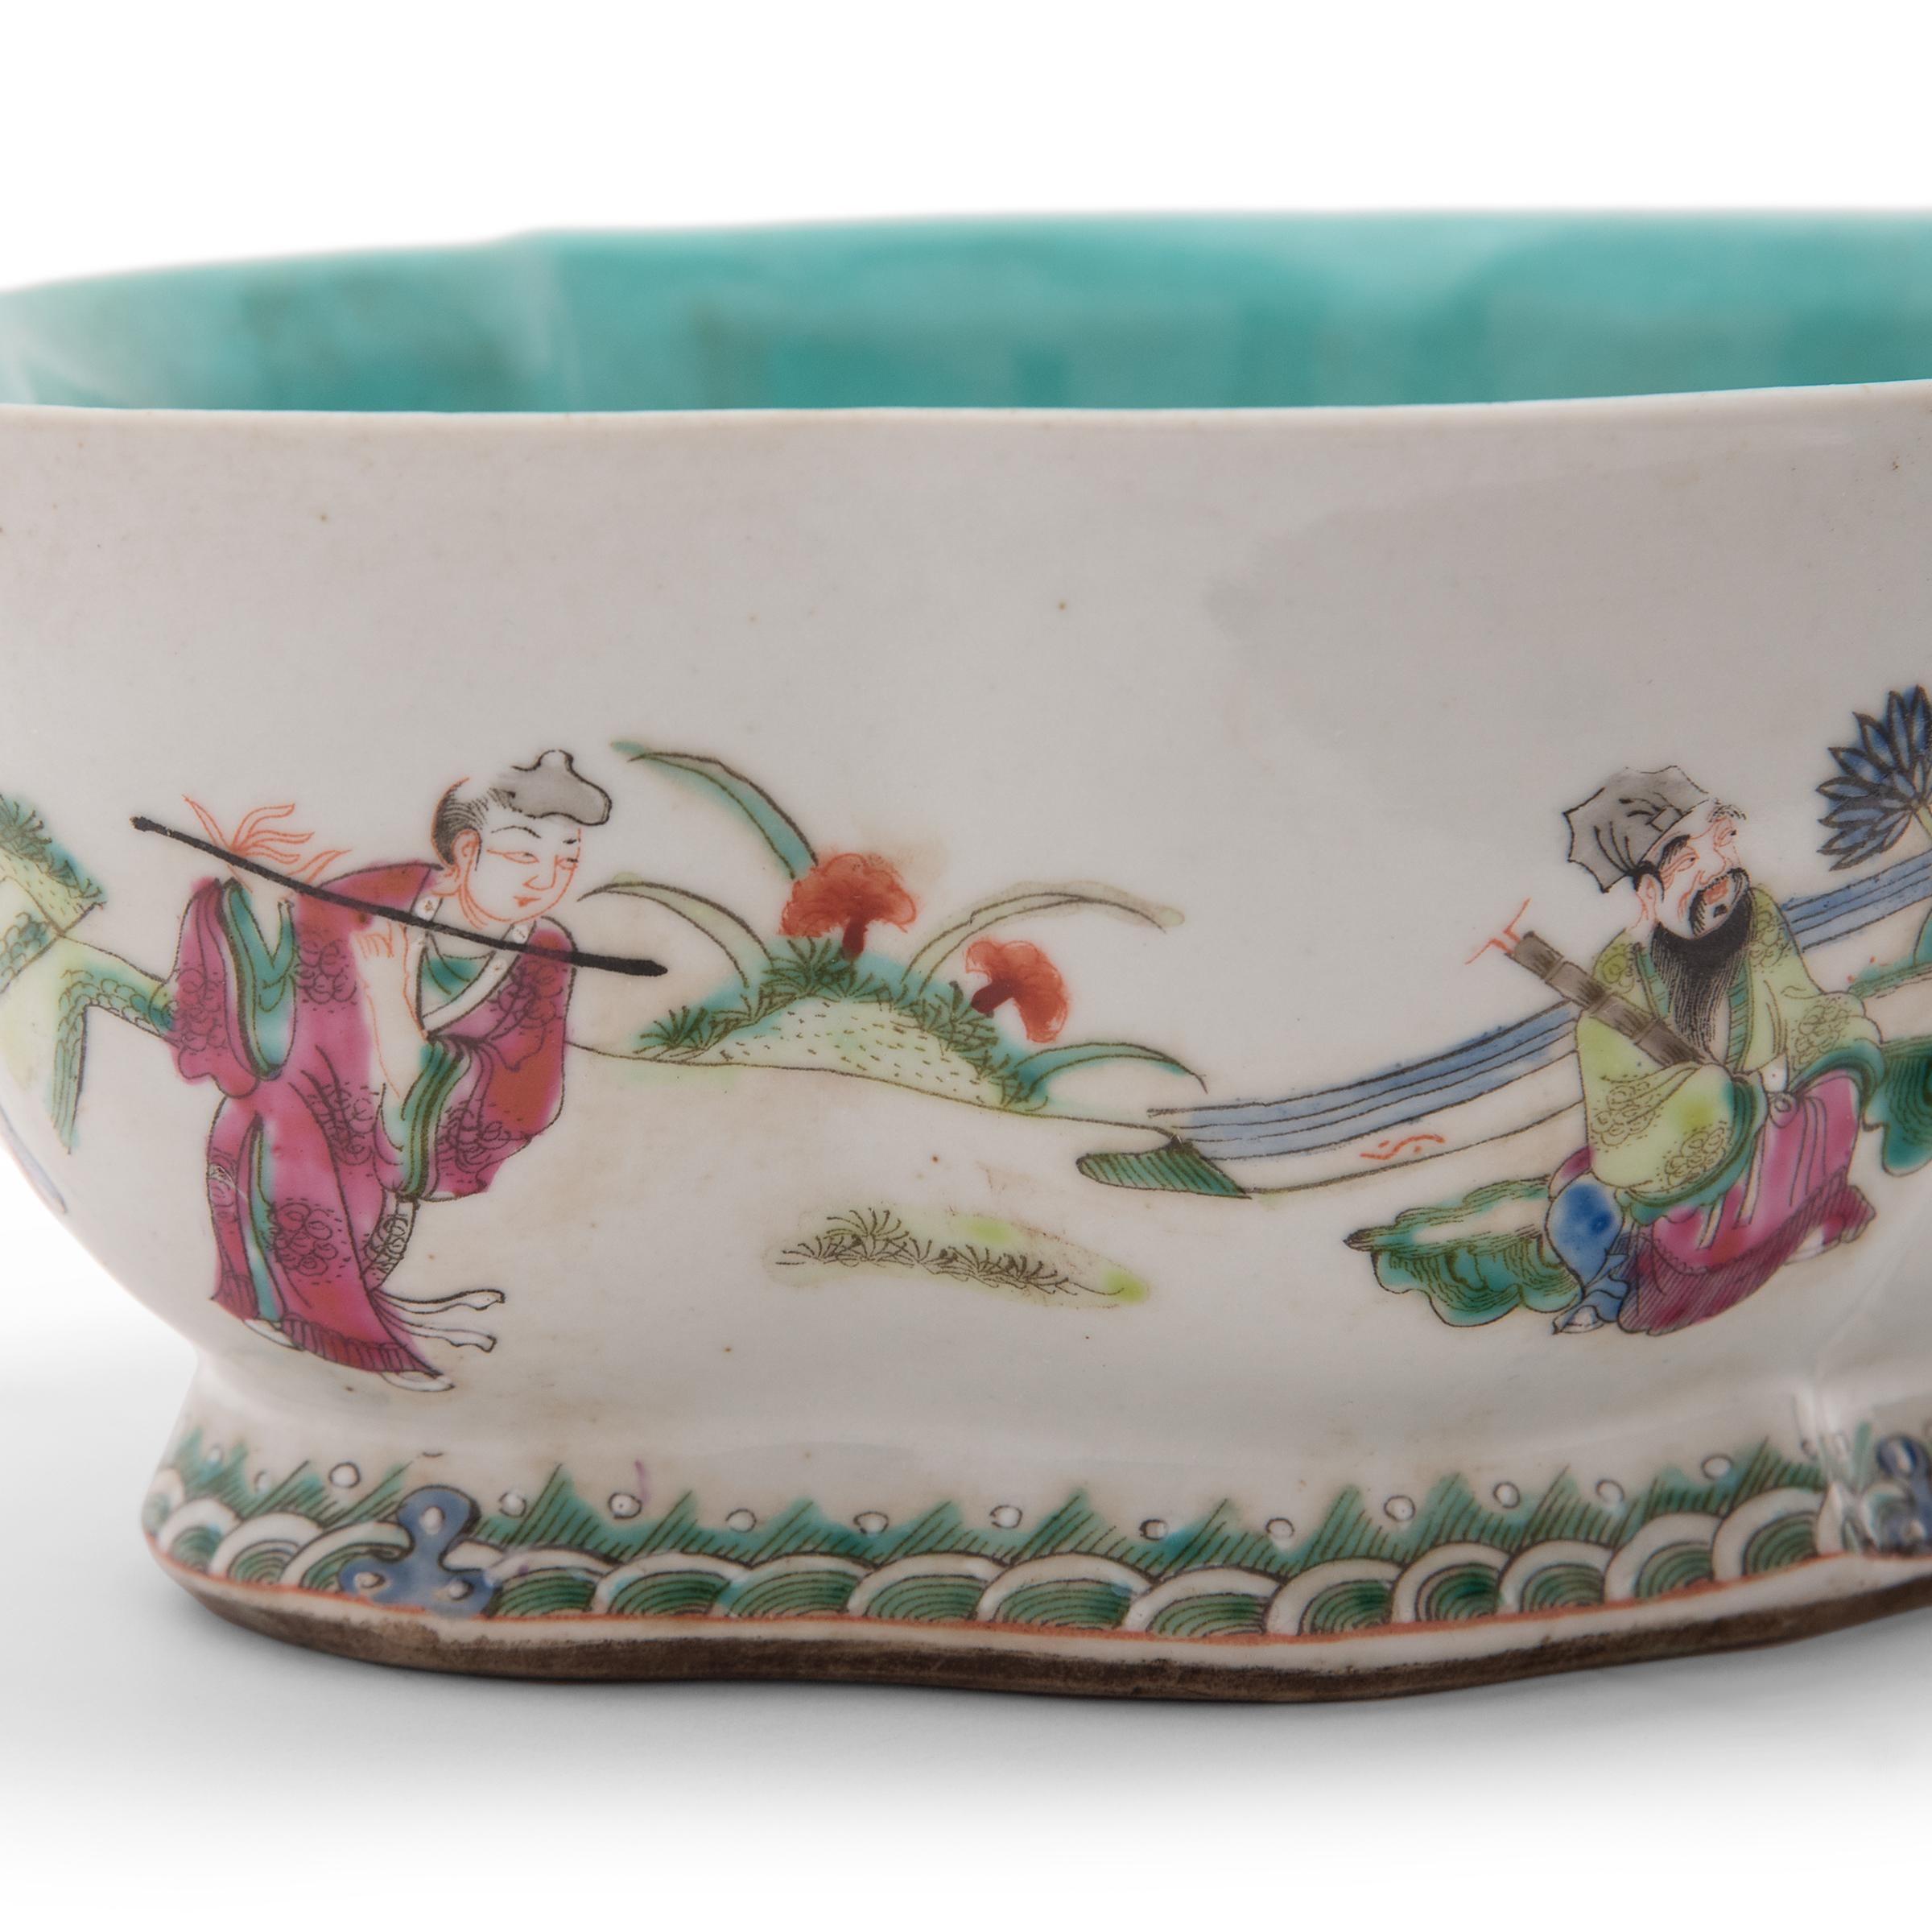 Early 20th Century Chinese Footed Offering Bowl with Gathering of Immortals, c. 1900